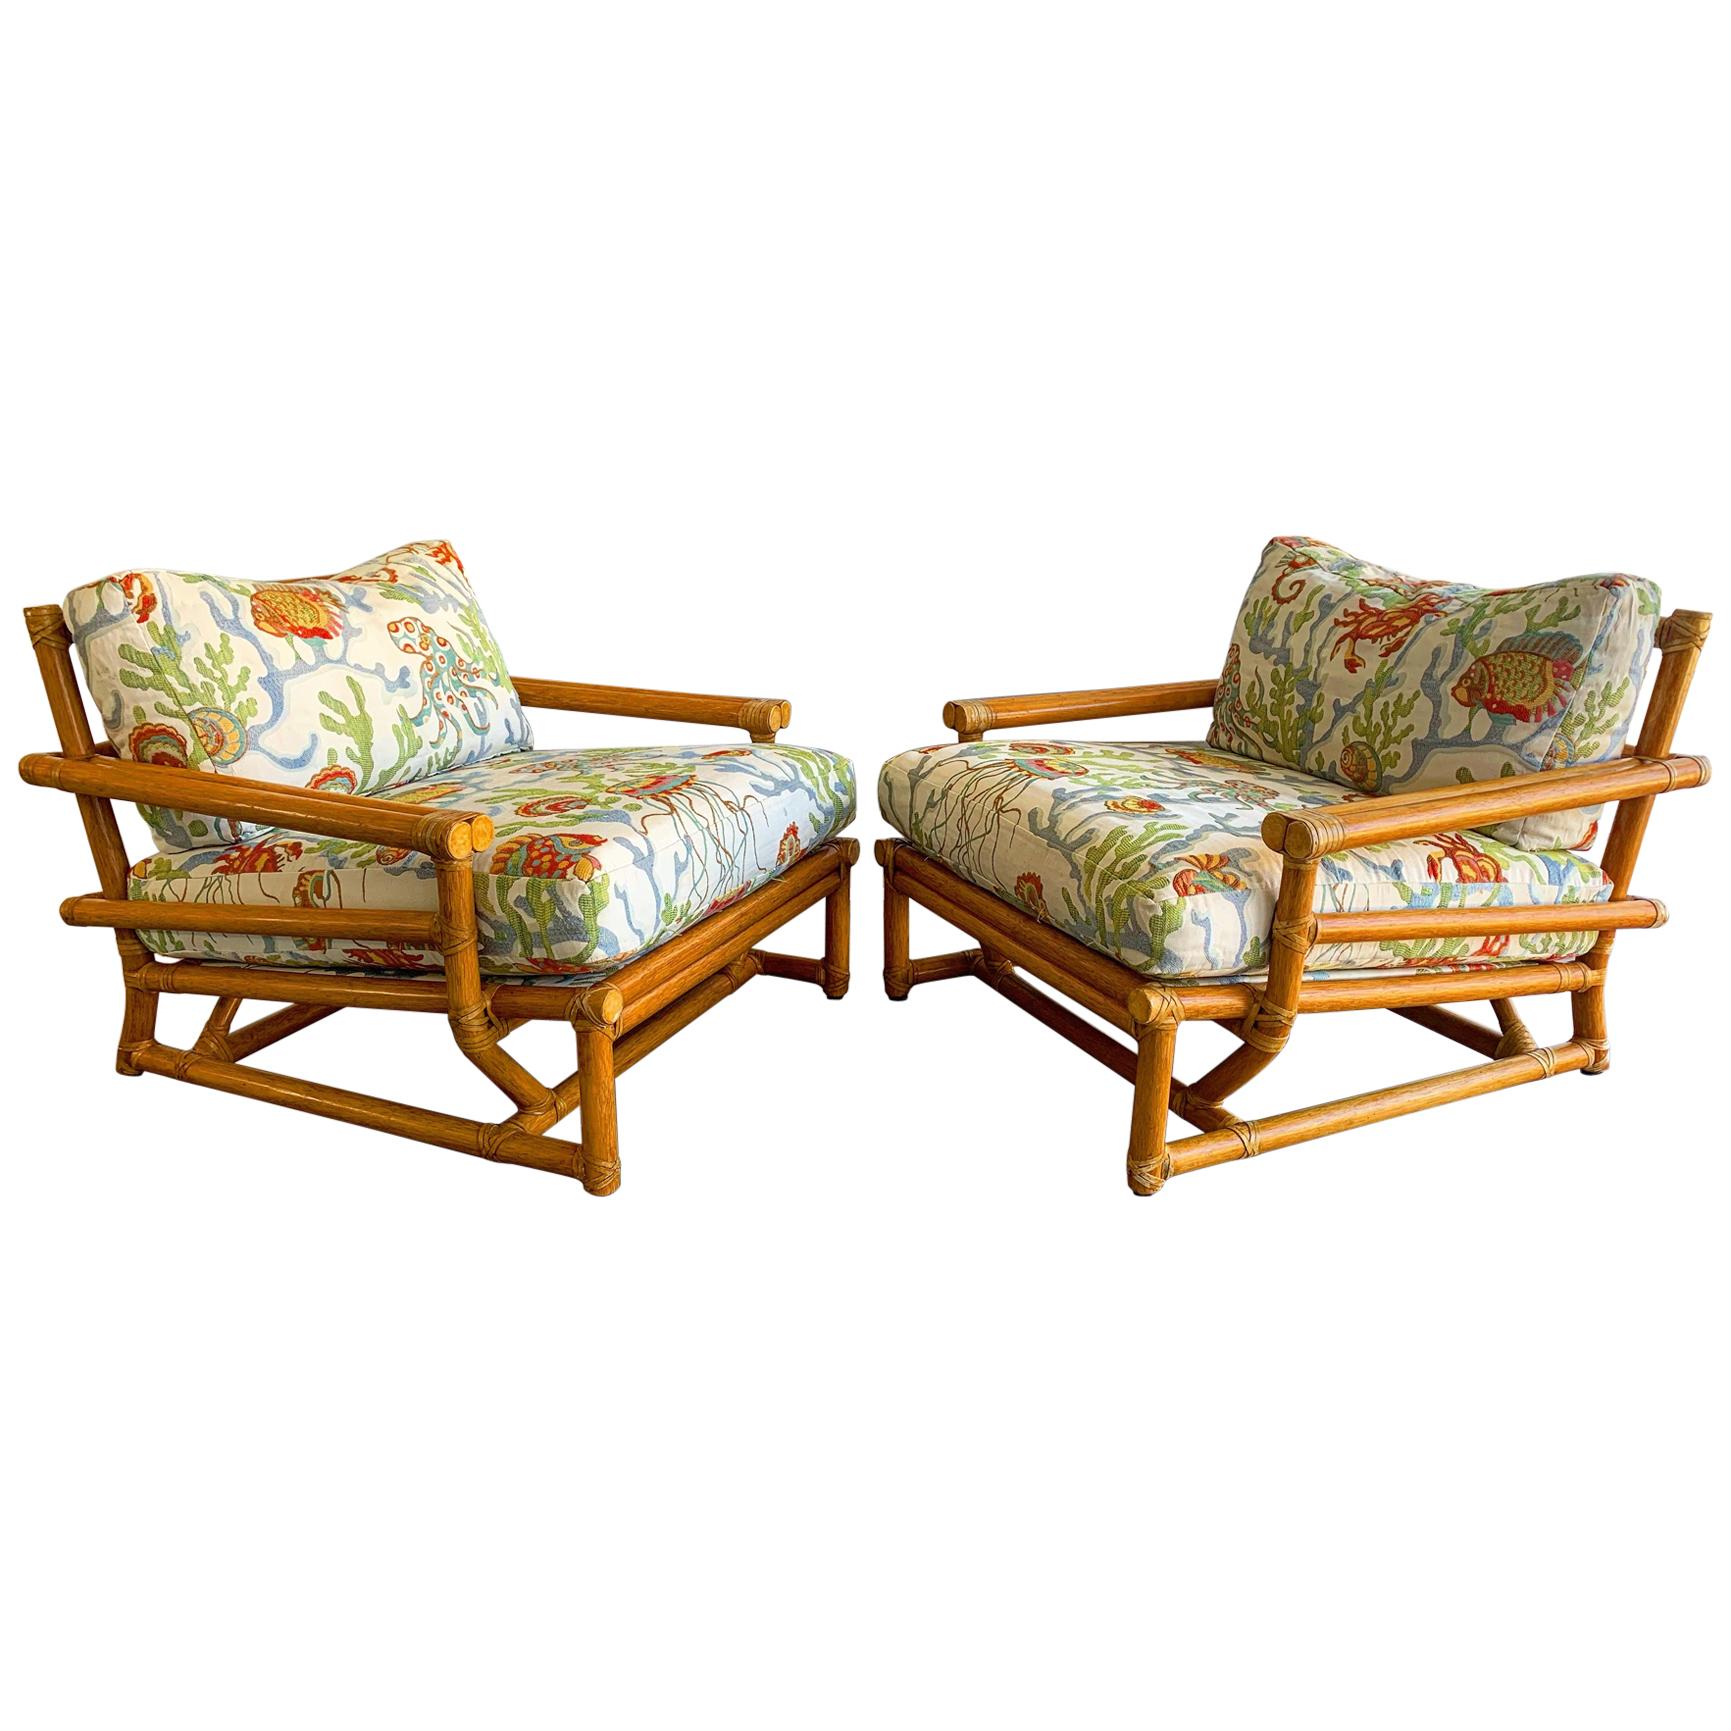 Details about   McGuire Furniture Arm Chair Rattan Bamboo Vintage 